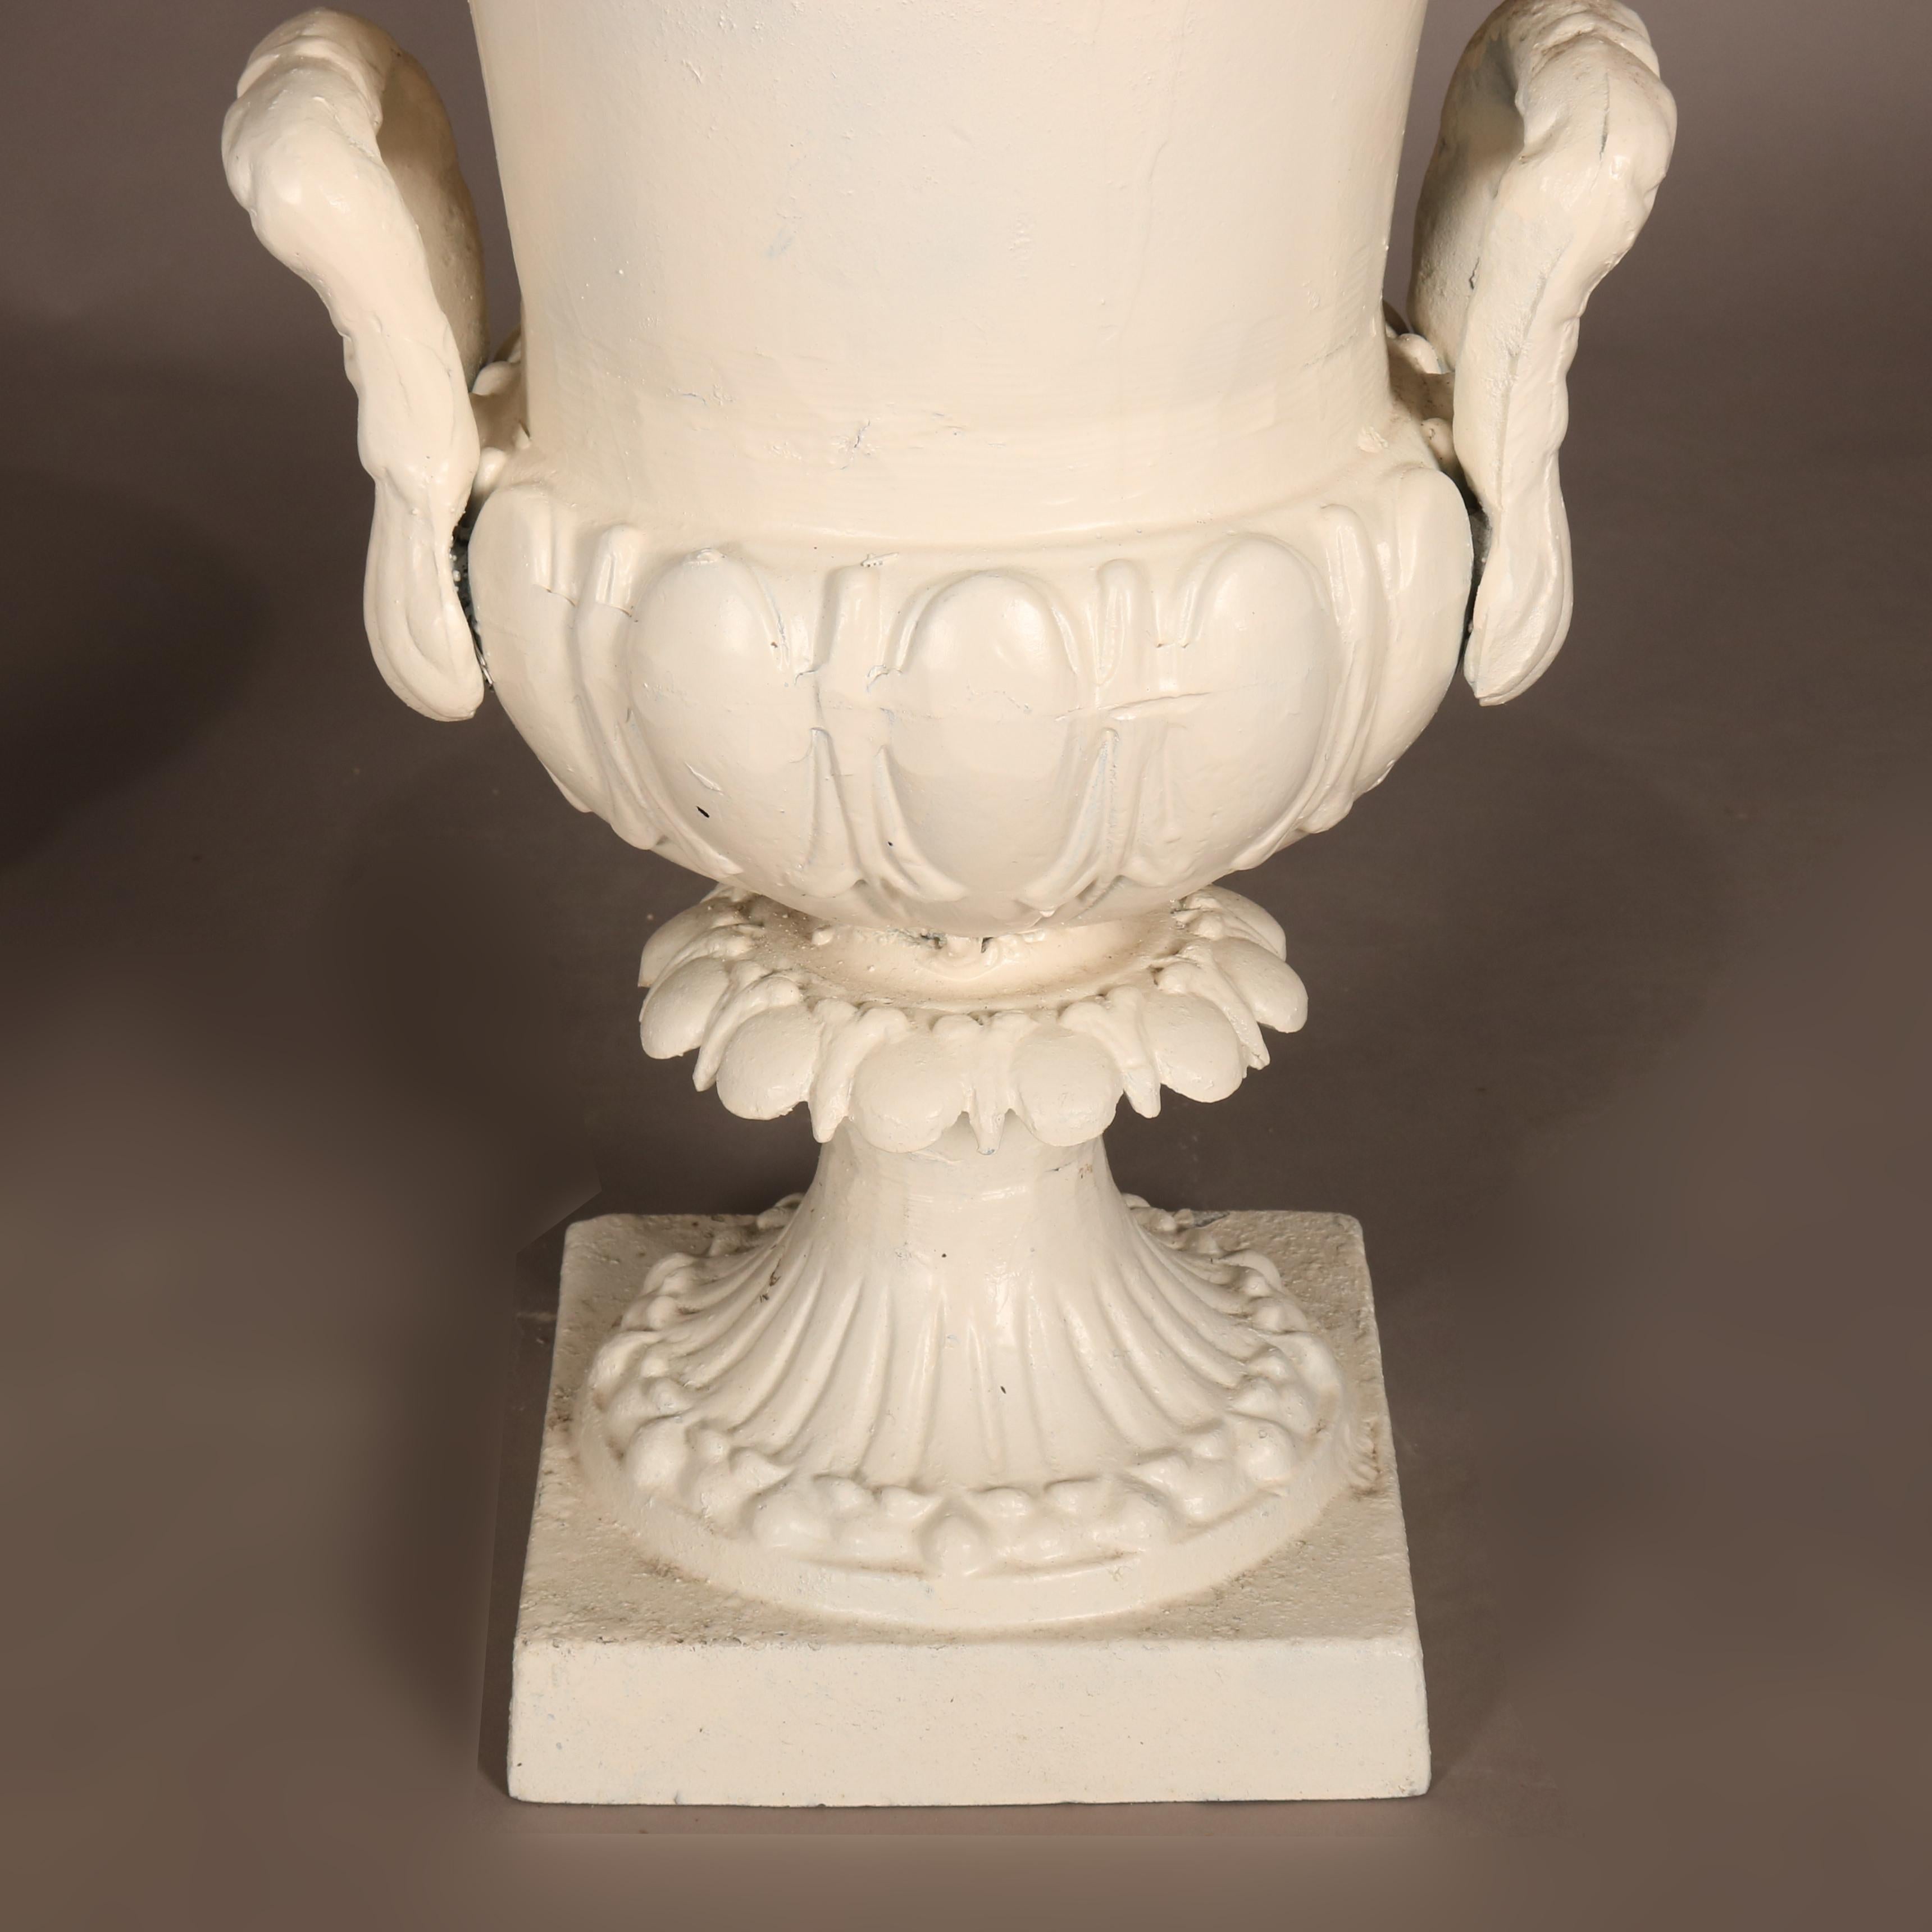 A pair of white painted tin Grecian style garden urns feature flared form bowl with reeded base and double handles surmounting decorated plinth seated on square feet, 20th century

***DELIVERY NOTICE – Due to COVID-19 we have employed